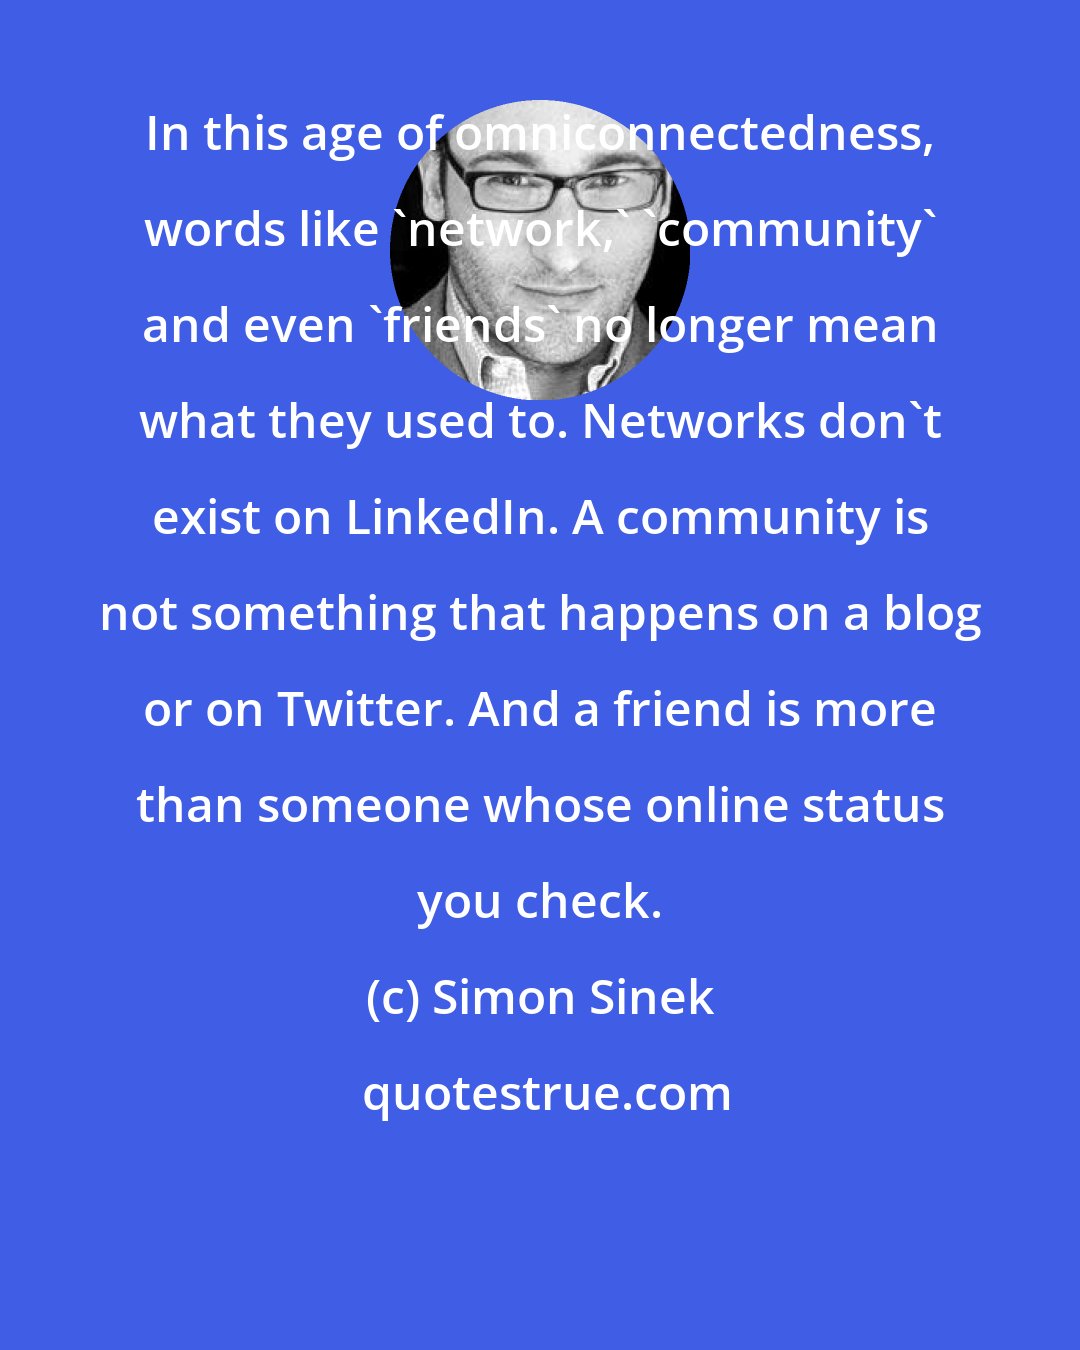 Simon Sinek: In this age of omniconnectedness, words like 'network,' 'community' and even 'friends' no longer mean what they used to. Networks don't exist on LinkedIn. A community is not something that happens on a blog or on Twitter. And a friend is more than someone whose online status you check.